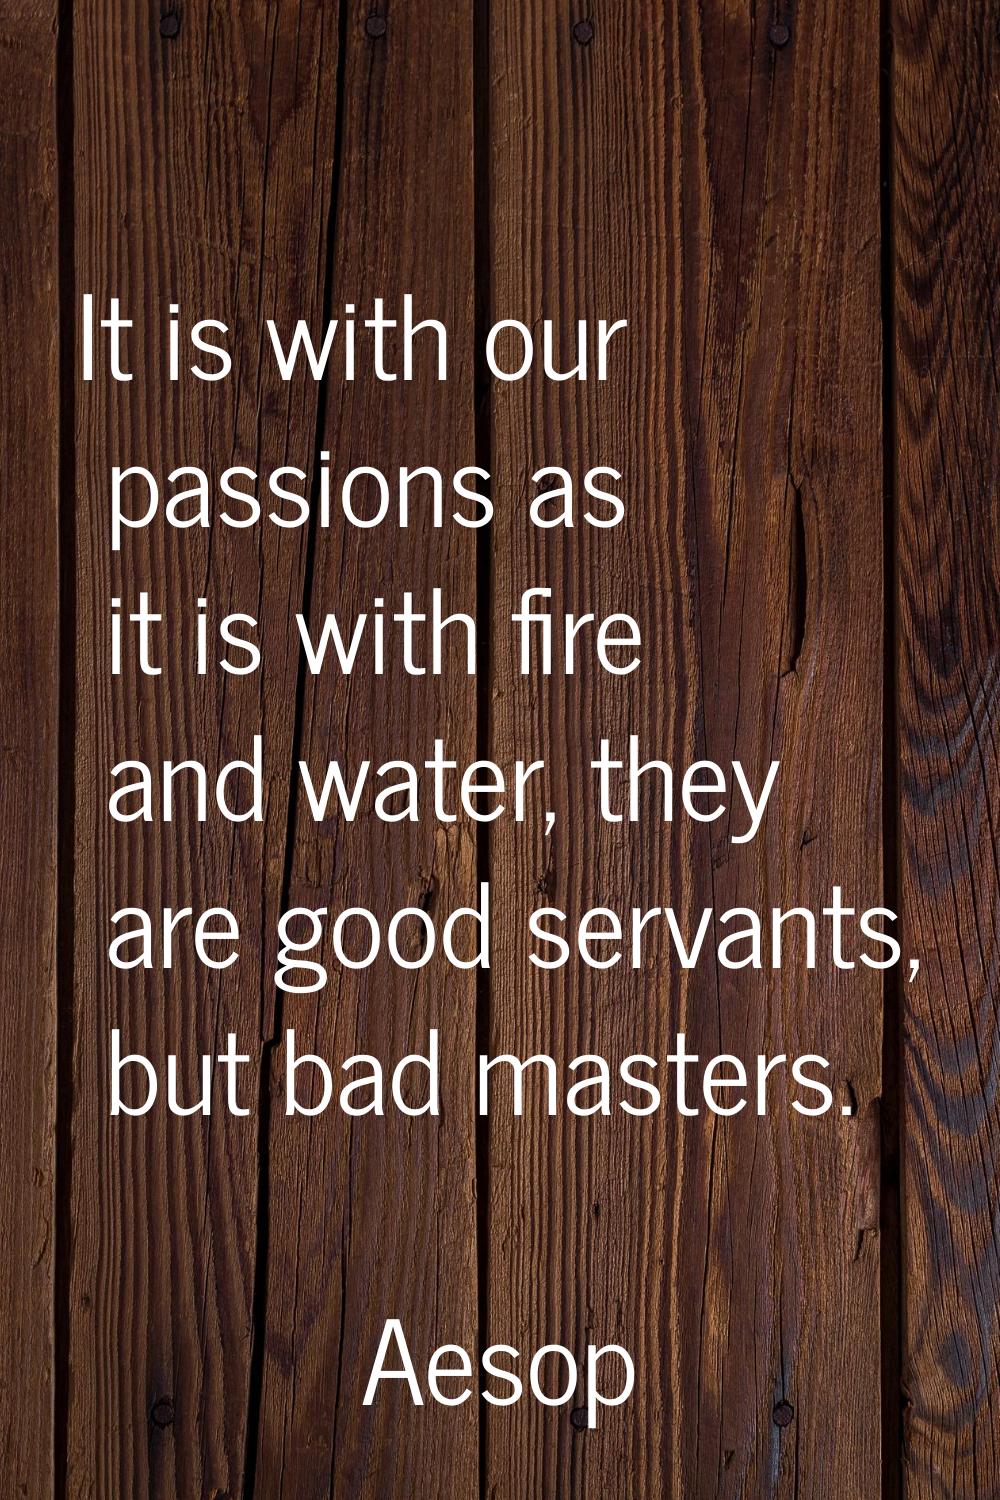 It is with our passions as it is with fire and water, they are good servants, but bad masters.